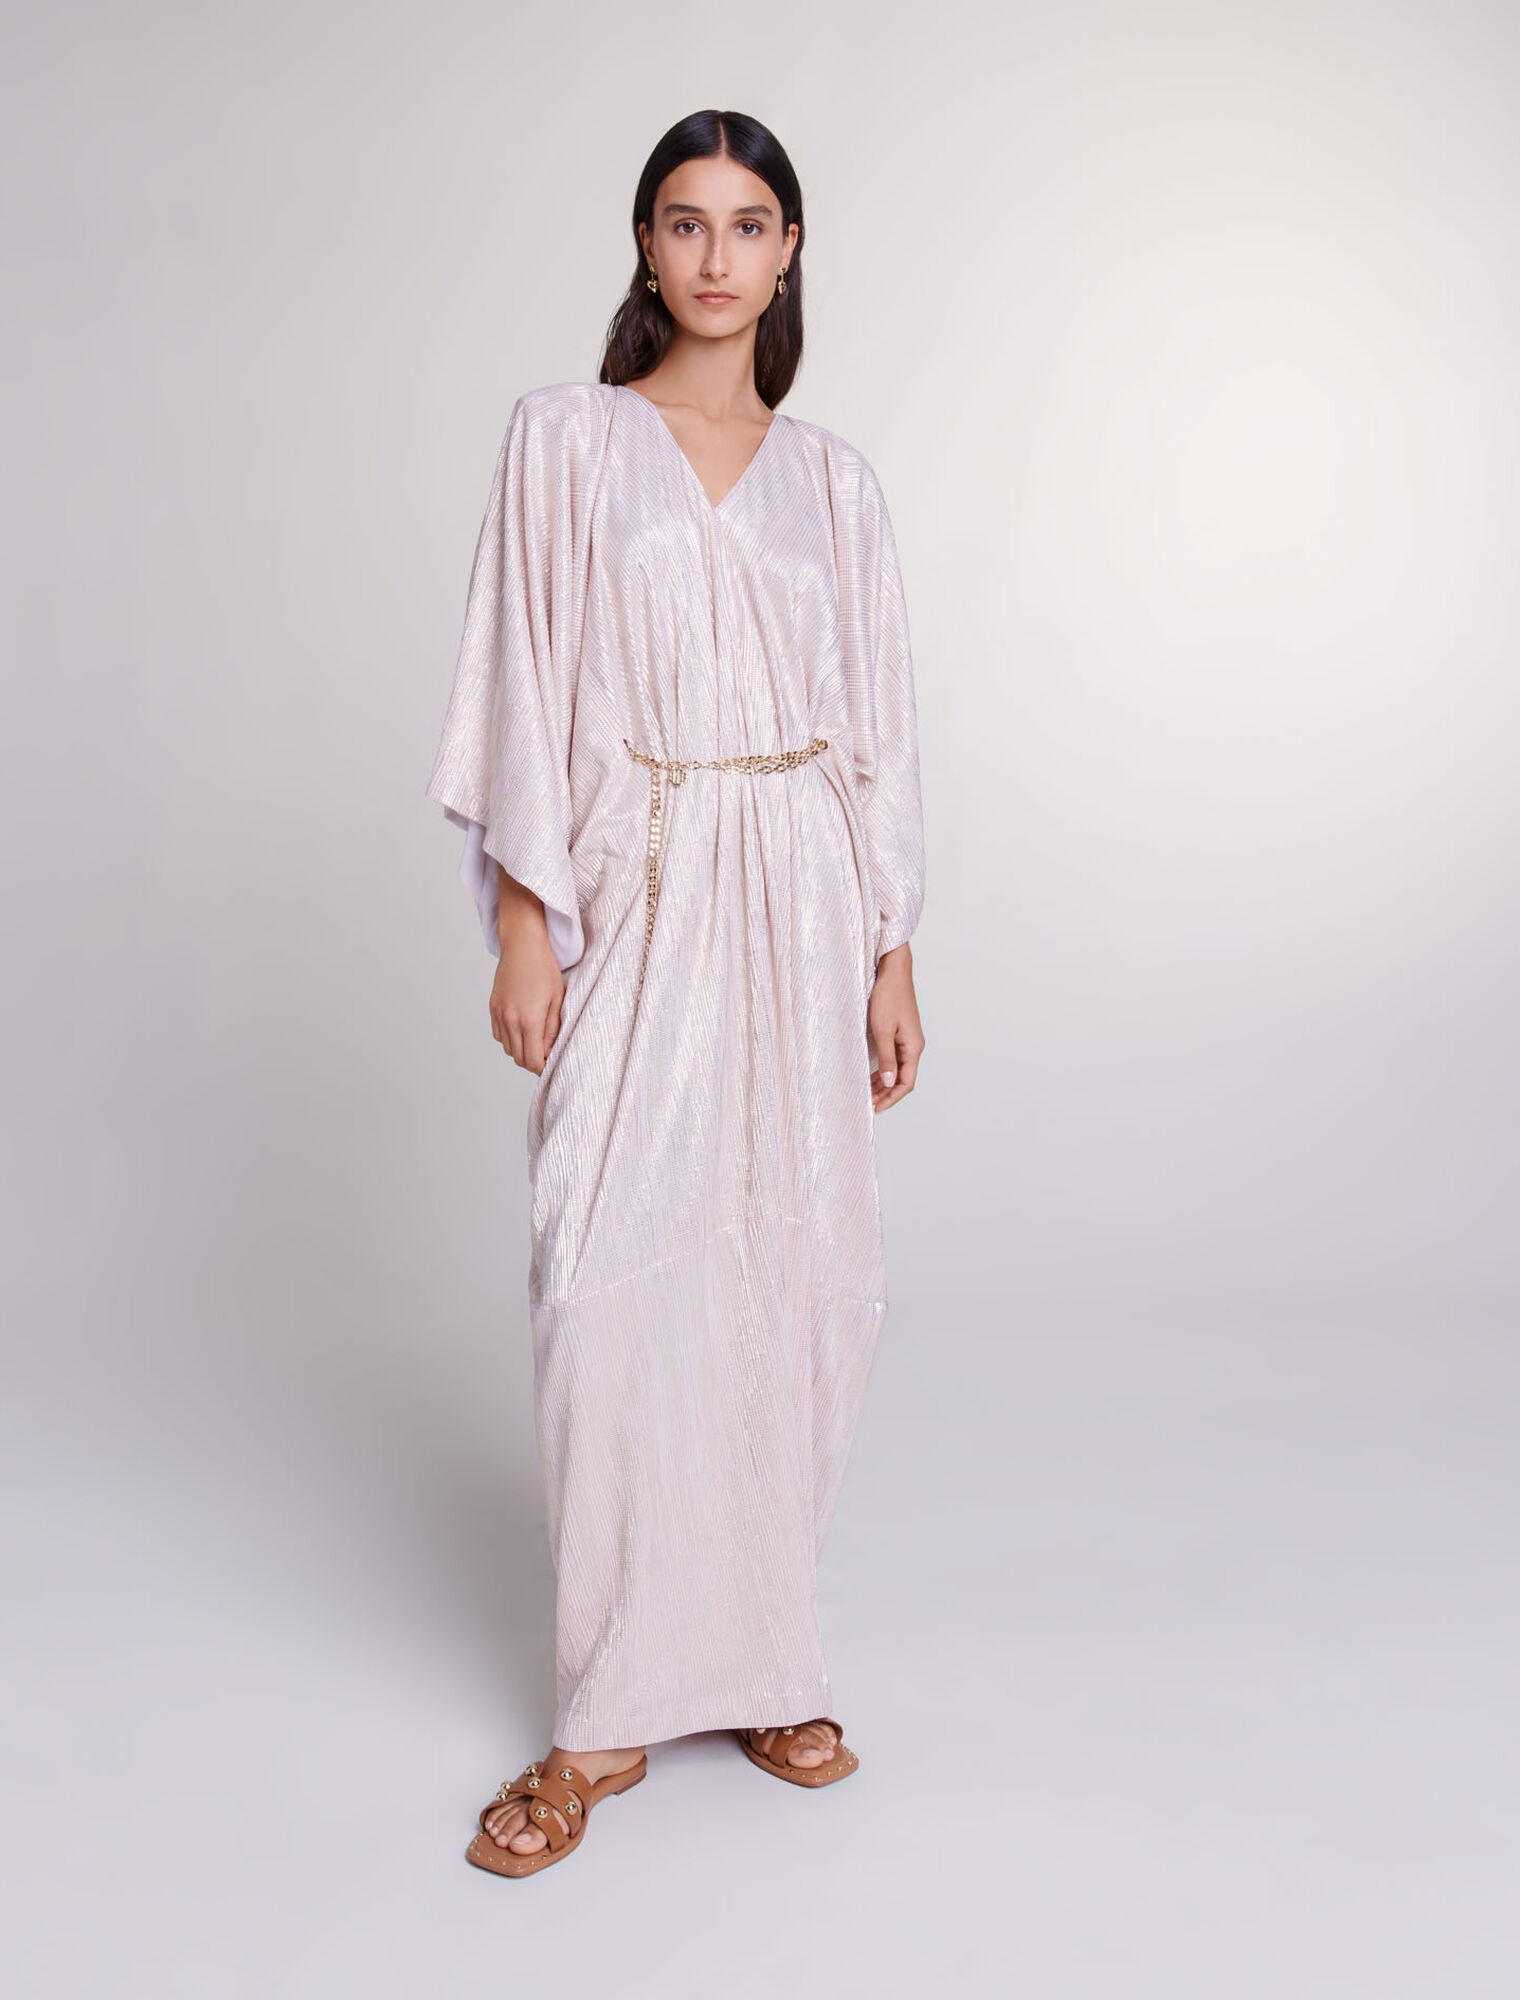 Belted maxi dress